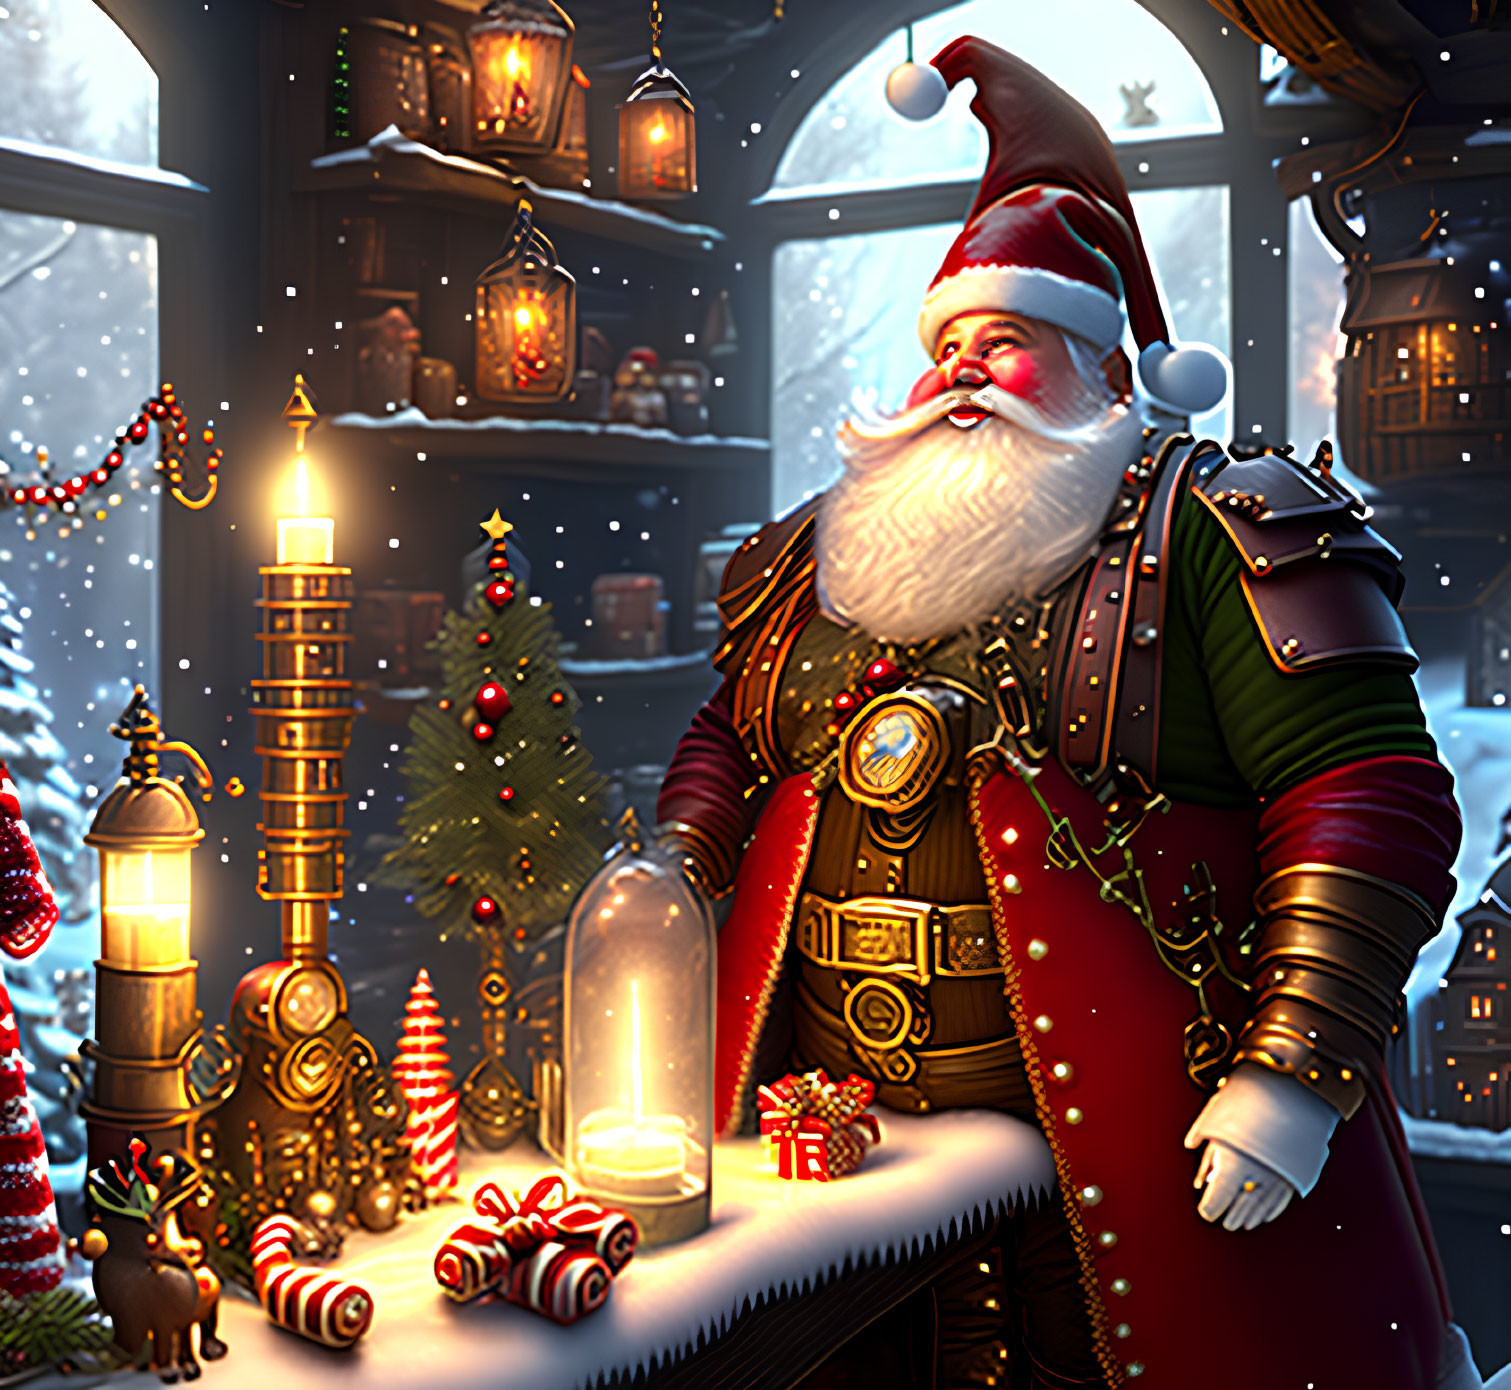 Santa Claus with gifts by Christmas tree and snowfall scene.